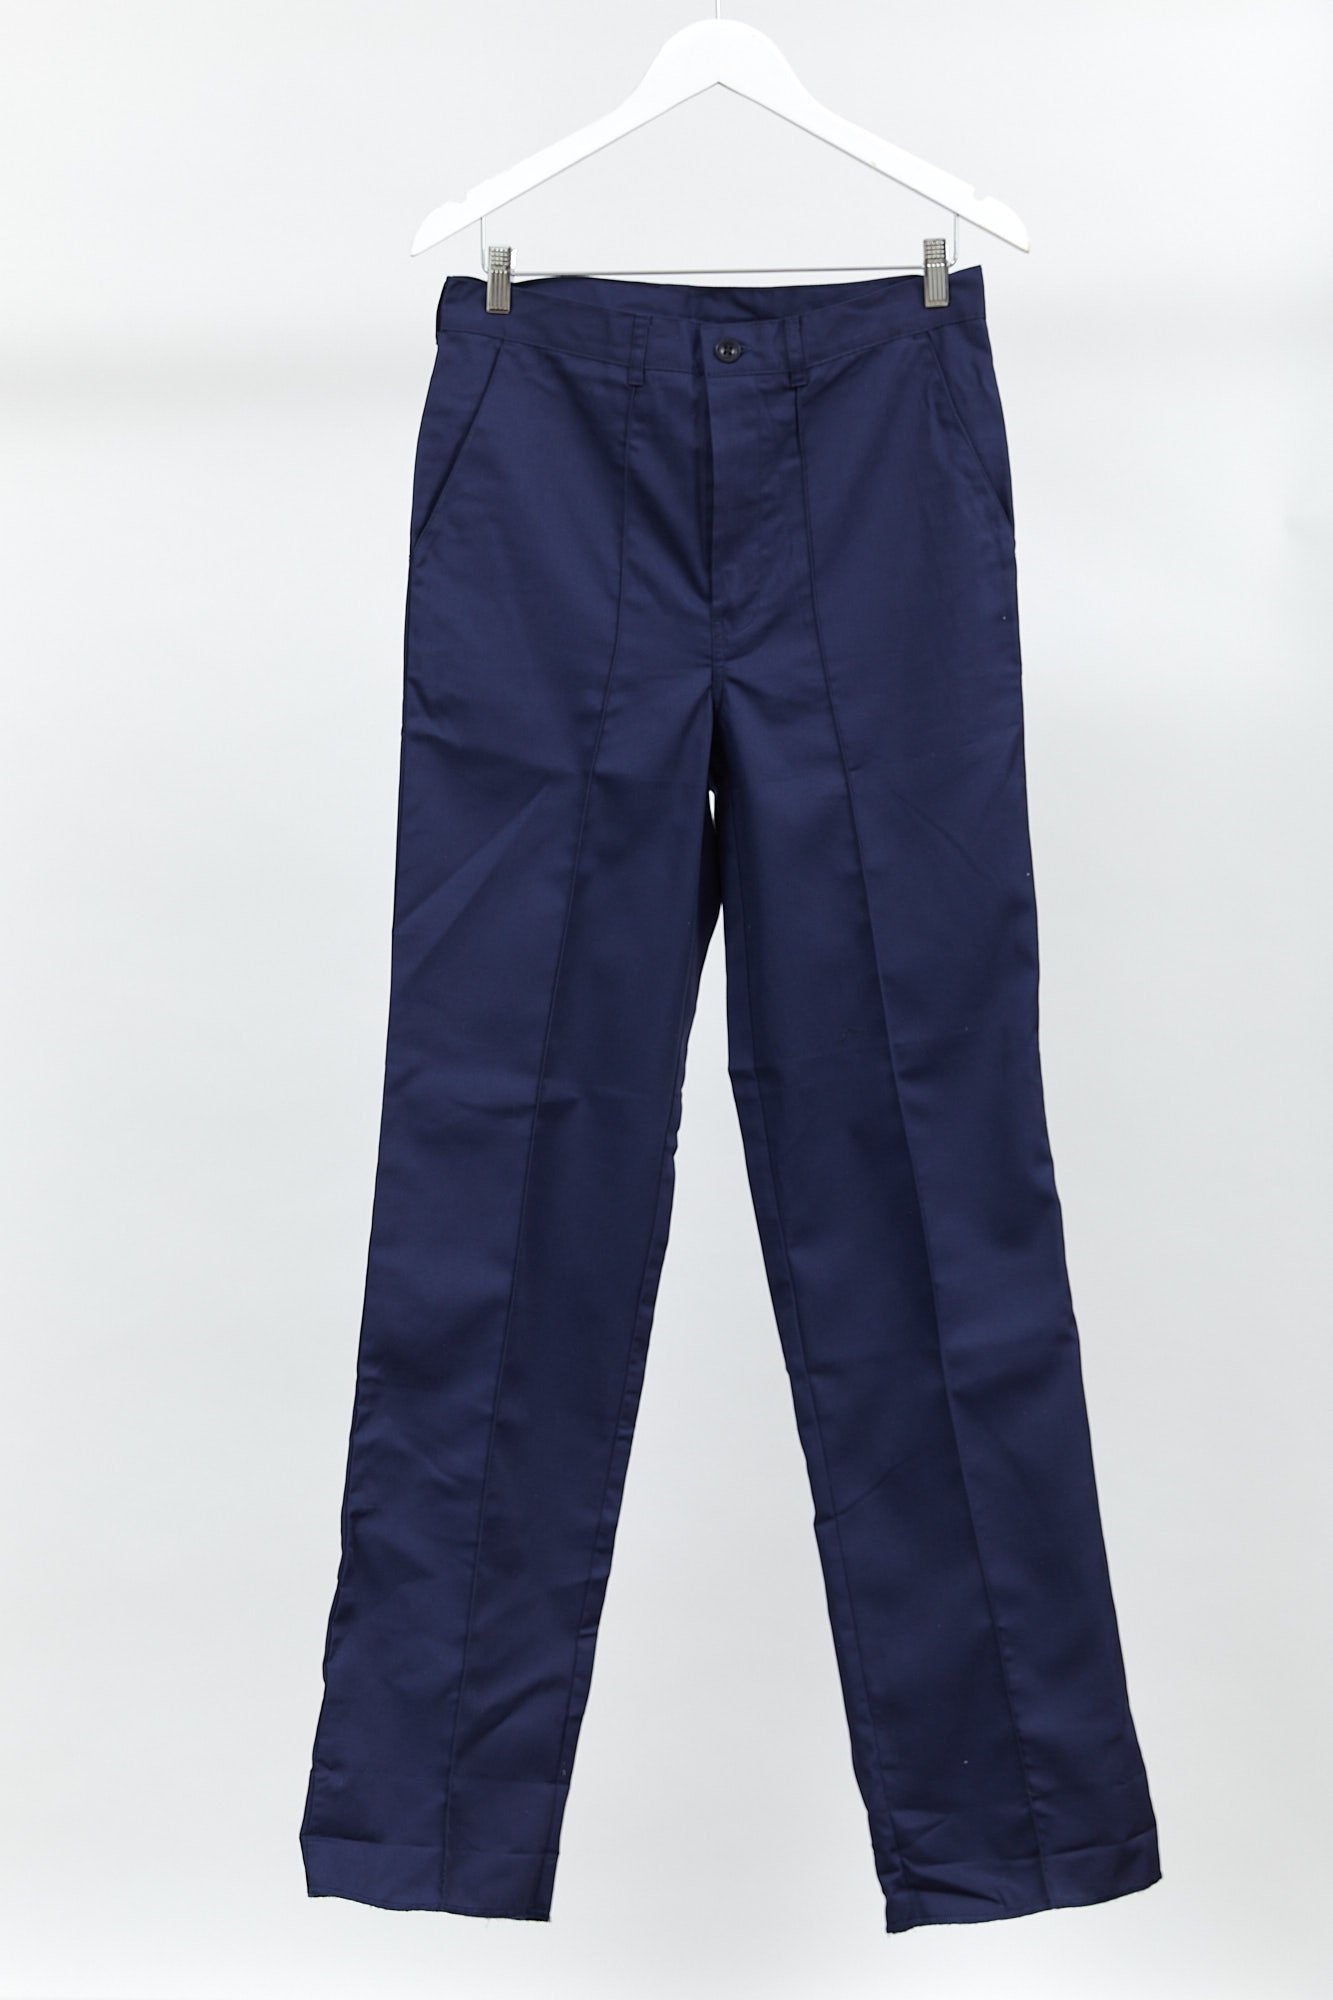 Navy workwear trousers: size medium or 32"